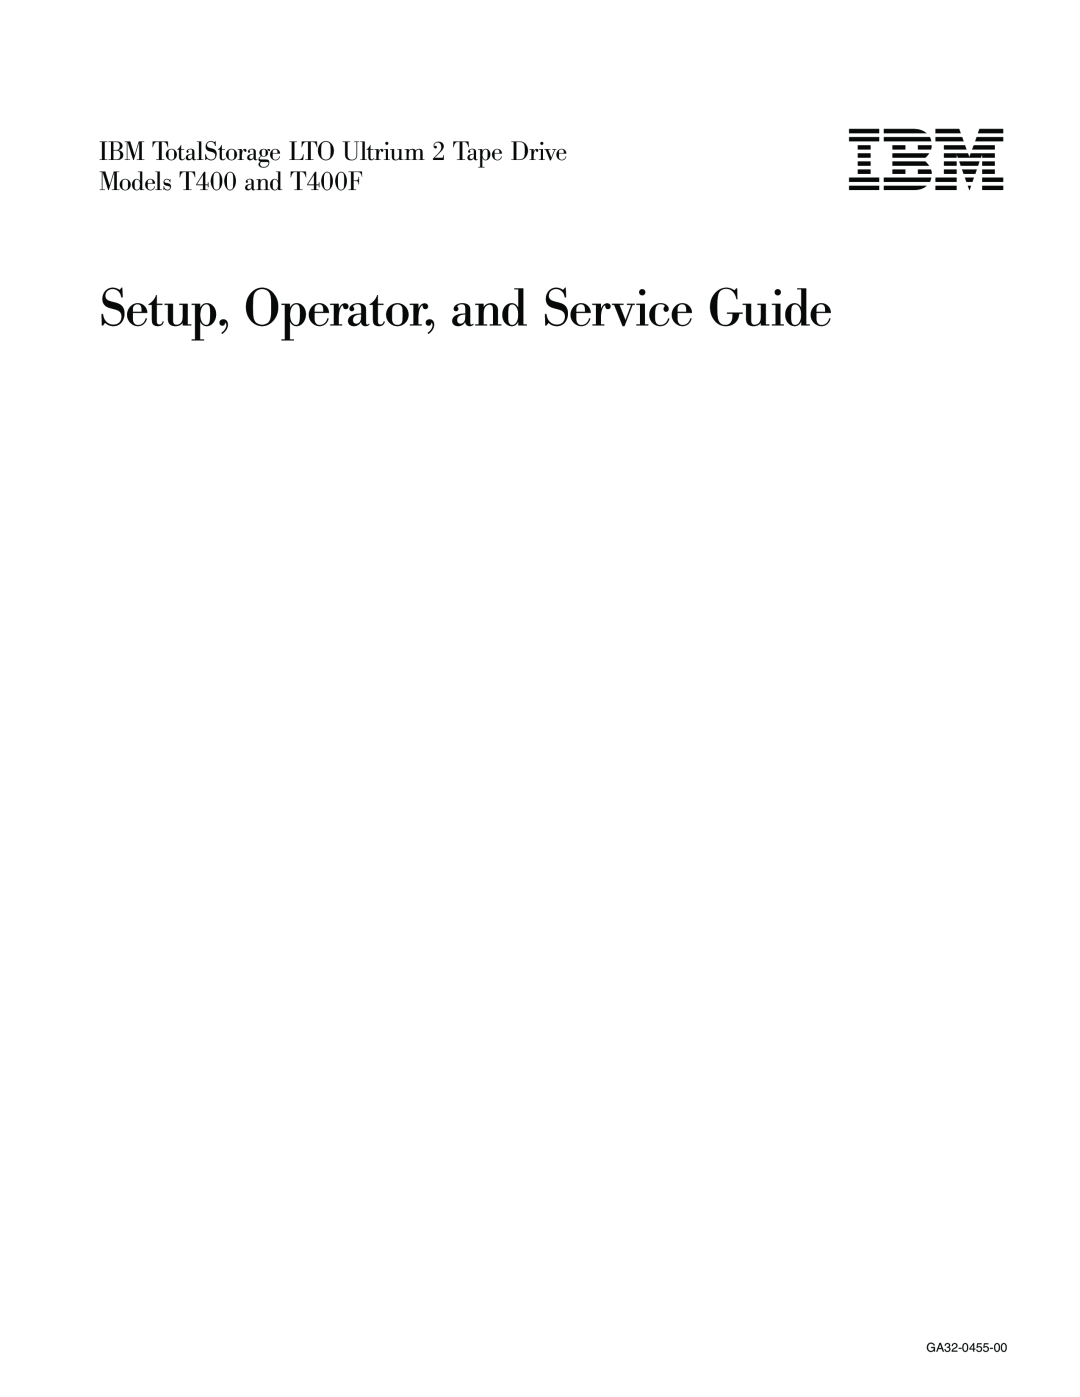 IBM manual Setup, Operator, and Service Guide, IBM TotalStorage LTO Ultrium 2 Tape Drive, Models T400 and T400F 